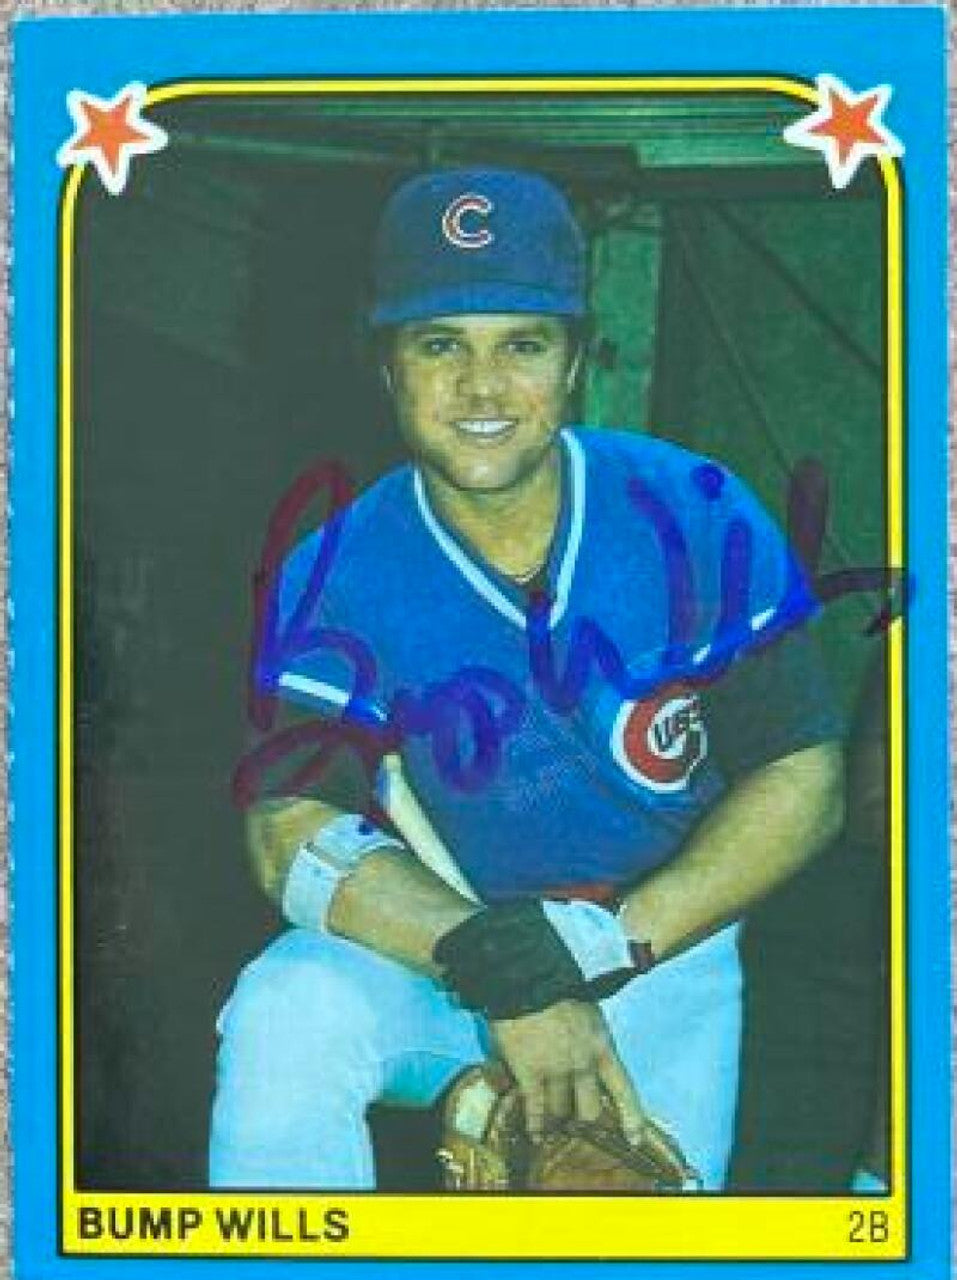 Bump Wills Signed 1983 Fleer Star Stickers Baseball Card - Chicago Cubs